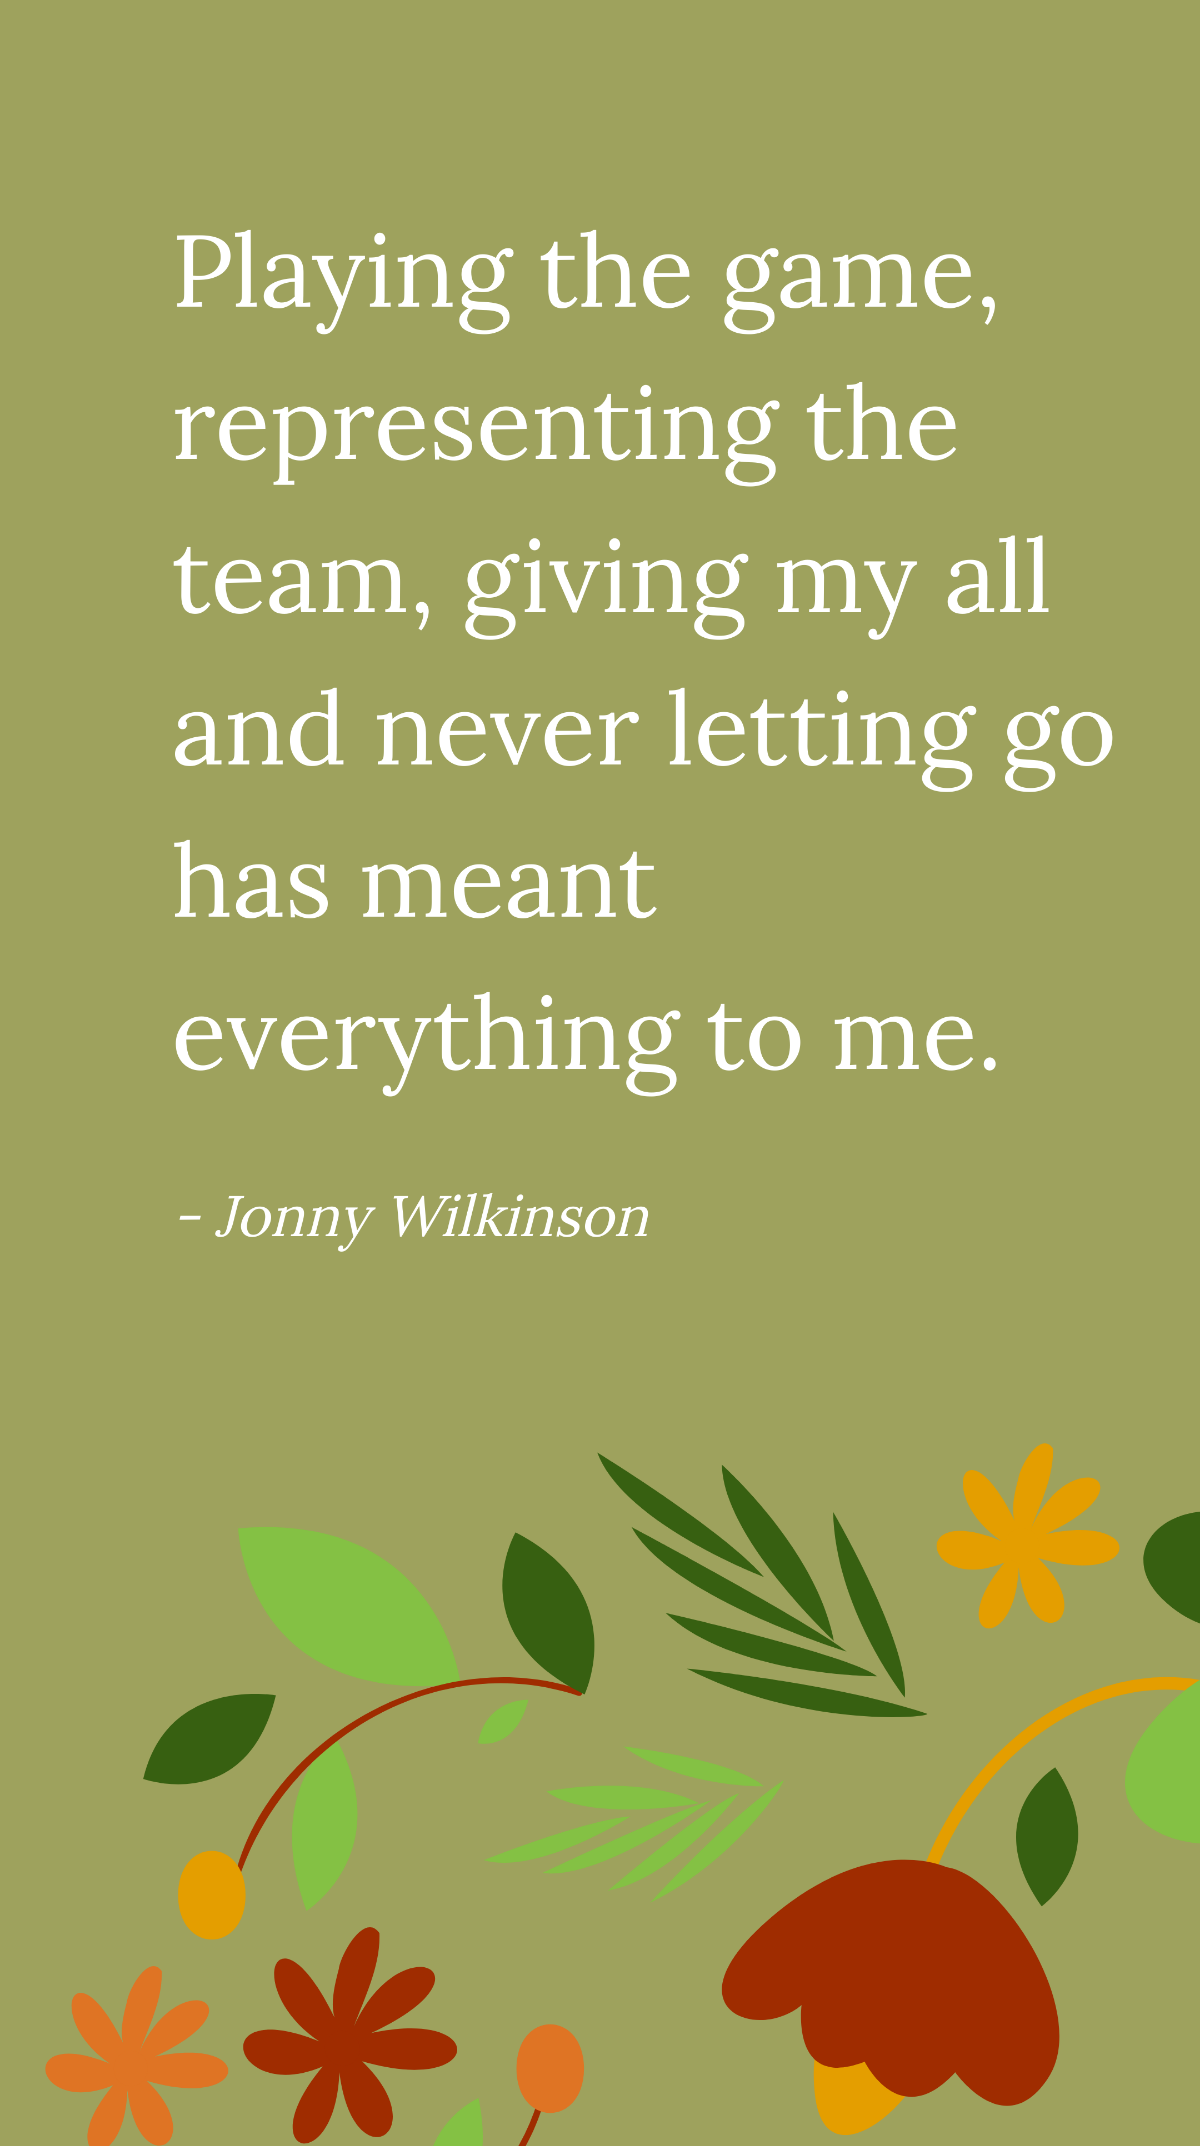 Jonny Wilkinson - Playing the game, representing the team, giving my all and never letting go has meant everything to me. Template